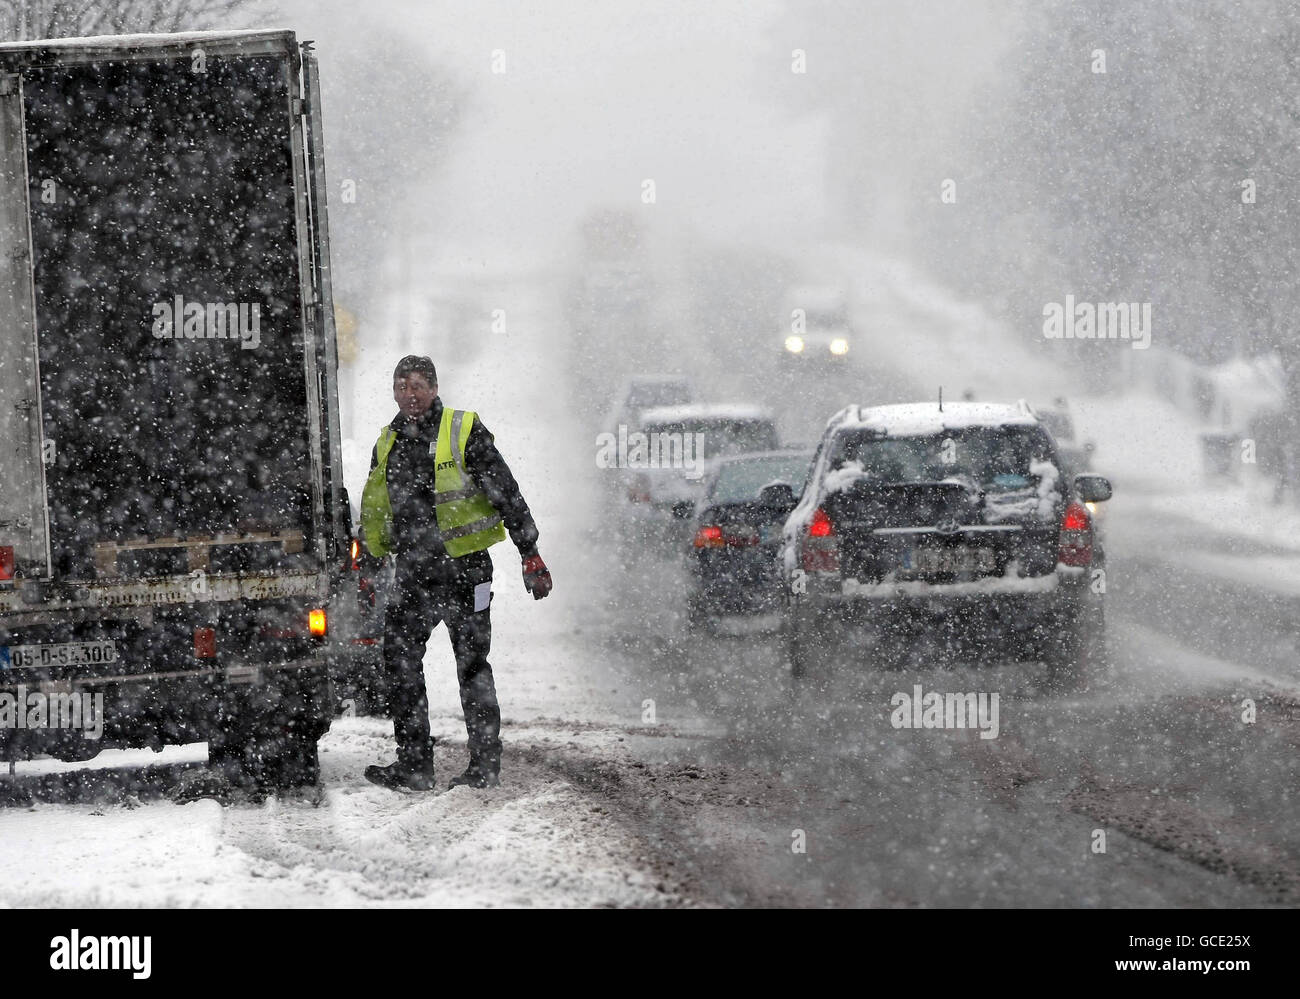 A delivery man works in heavy snow in Cavan town, Ireland, as the snow and rain made driving conditions treacherous and further sleet and snow is expected. Stock Photo